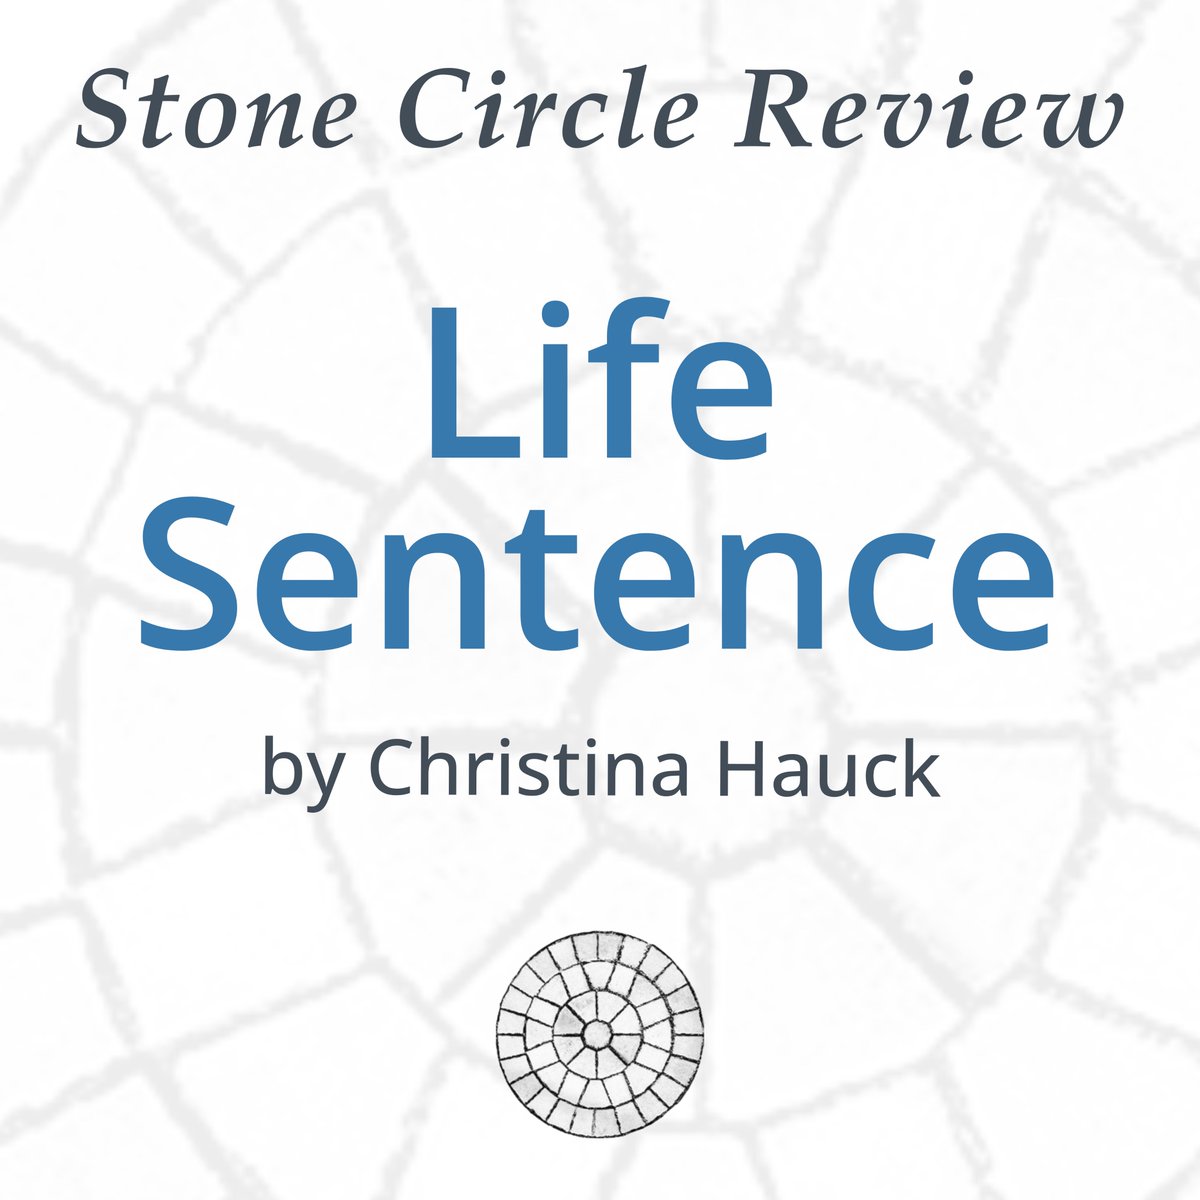 NEW POEM #126: 'Life Sentence' by Christina Hauck 'In unison, half step back, shake of head— sister, brother—eyes wide as I proffer gilt box, pound of grey ash and bone, all that remains' stonecirclereview.com/life-sentence/ #Poem #PoetryCommunity #Poetry #NewPoem